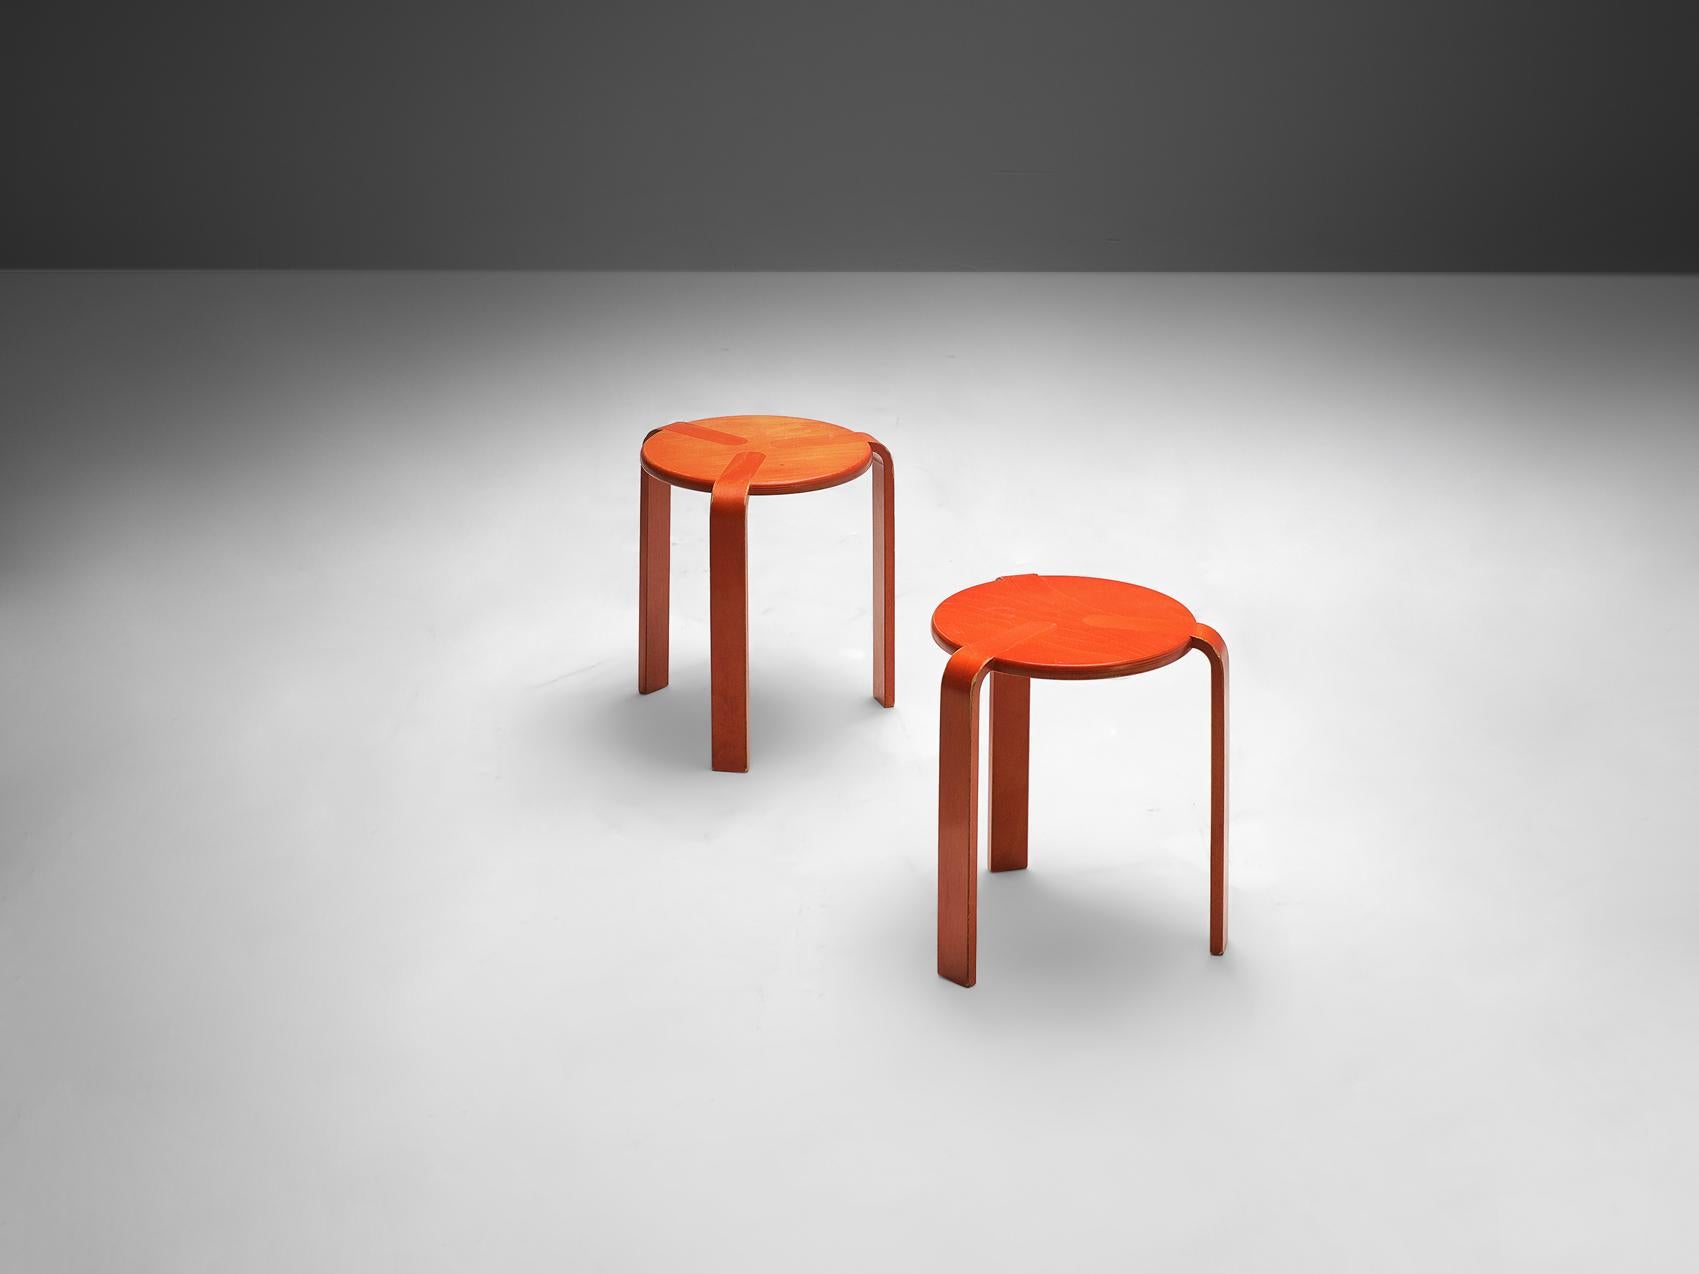 Bruno Rey for Dietiker, stools, beech plywood, Switzerland, 1970s 

These stools are made of beech plywood. The stool shows a basic design, with three curved legs that merge smoothly into the surface of the round seat. These stools are stackable